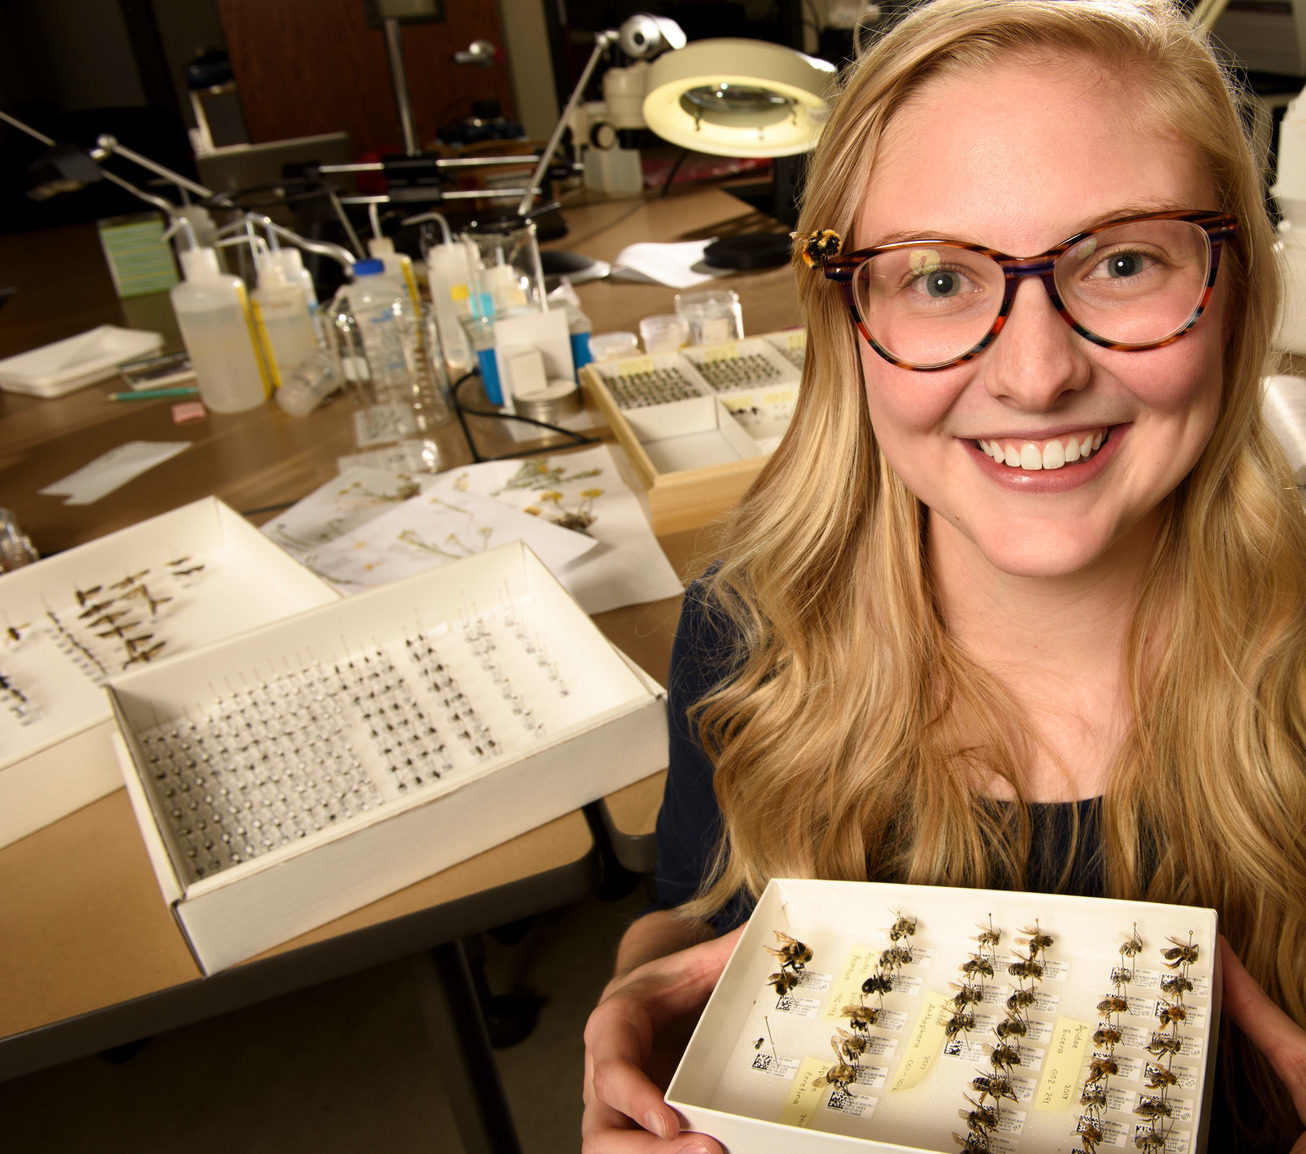 Student smiling with boxes of insects